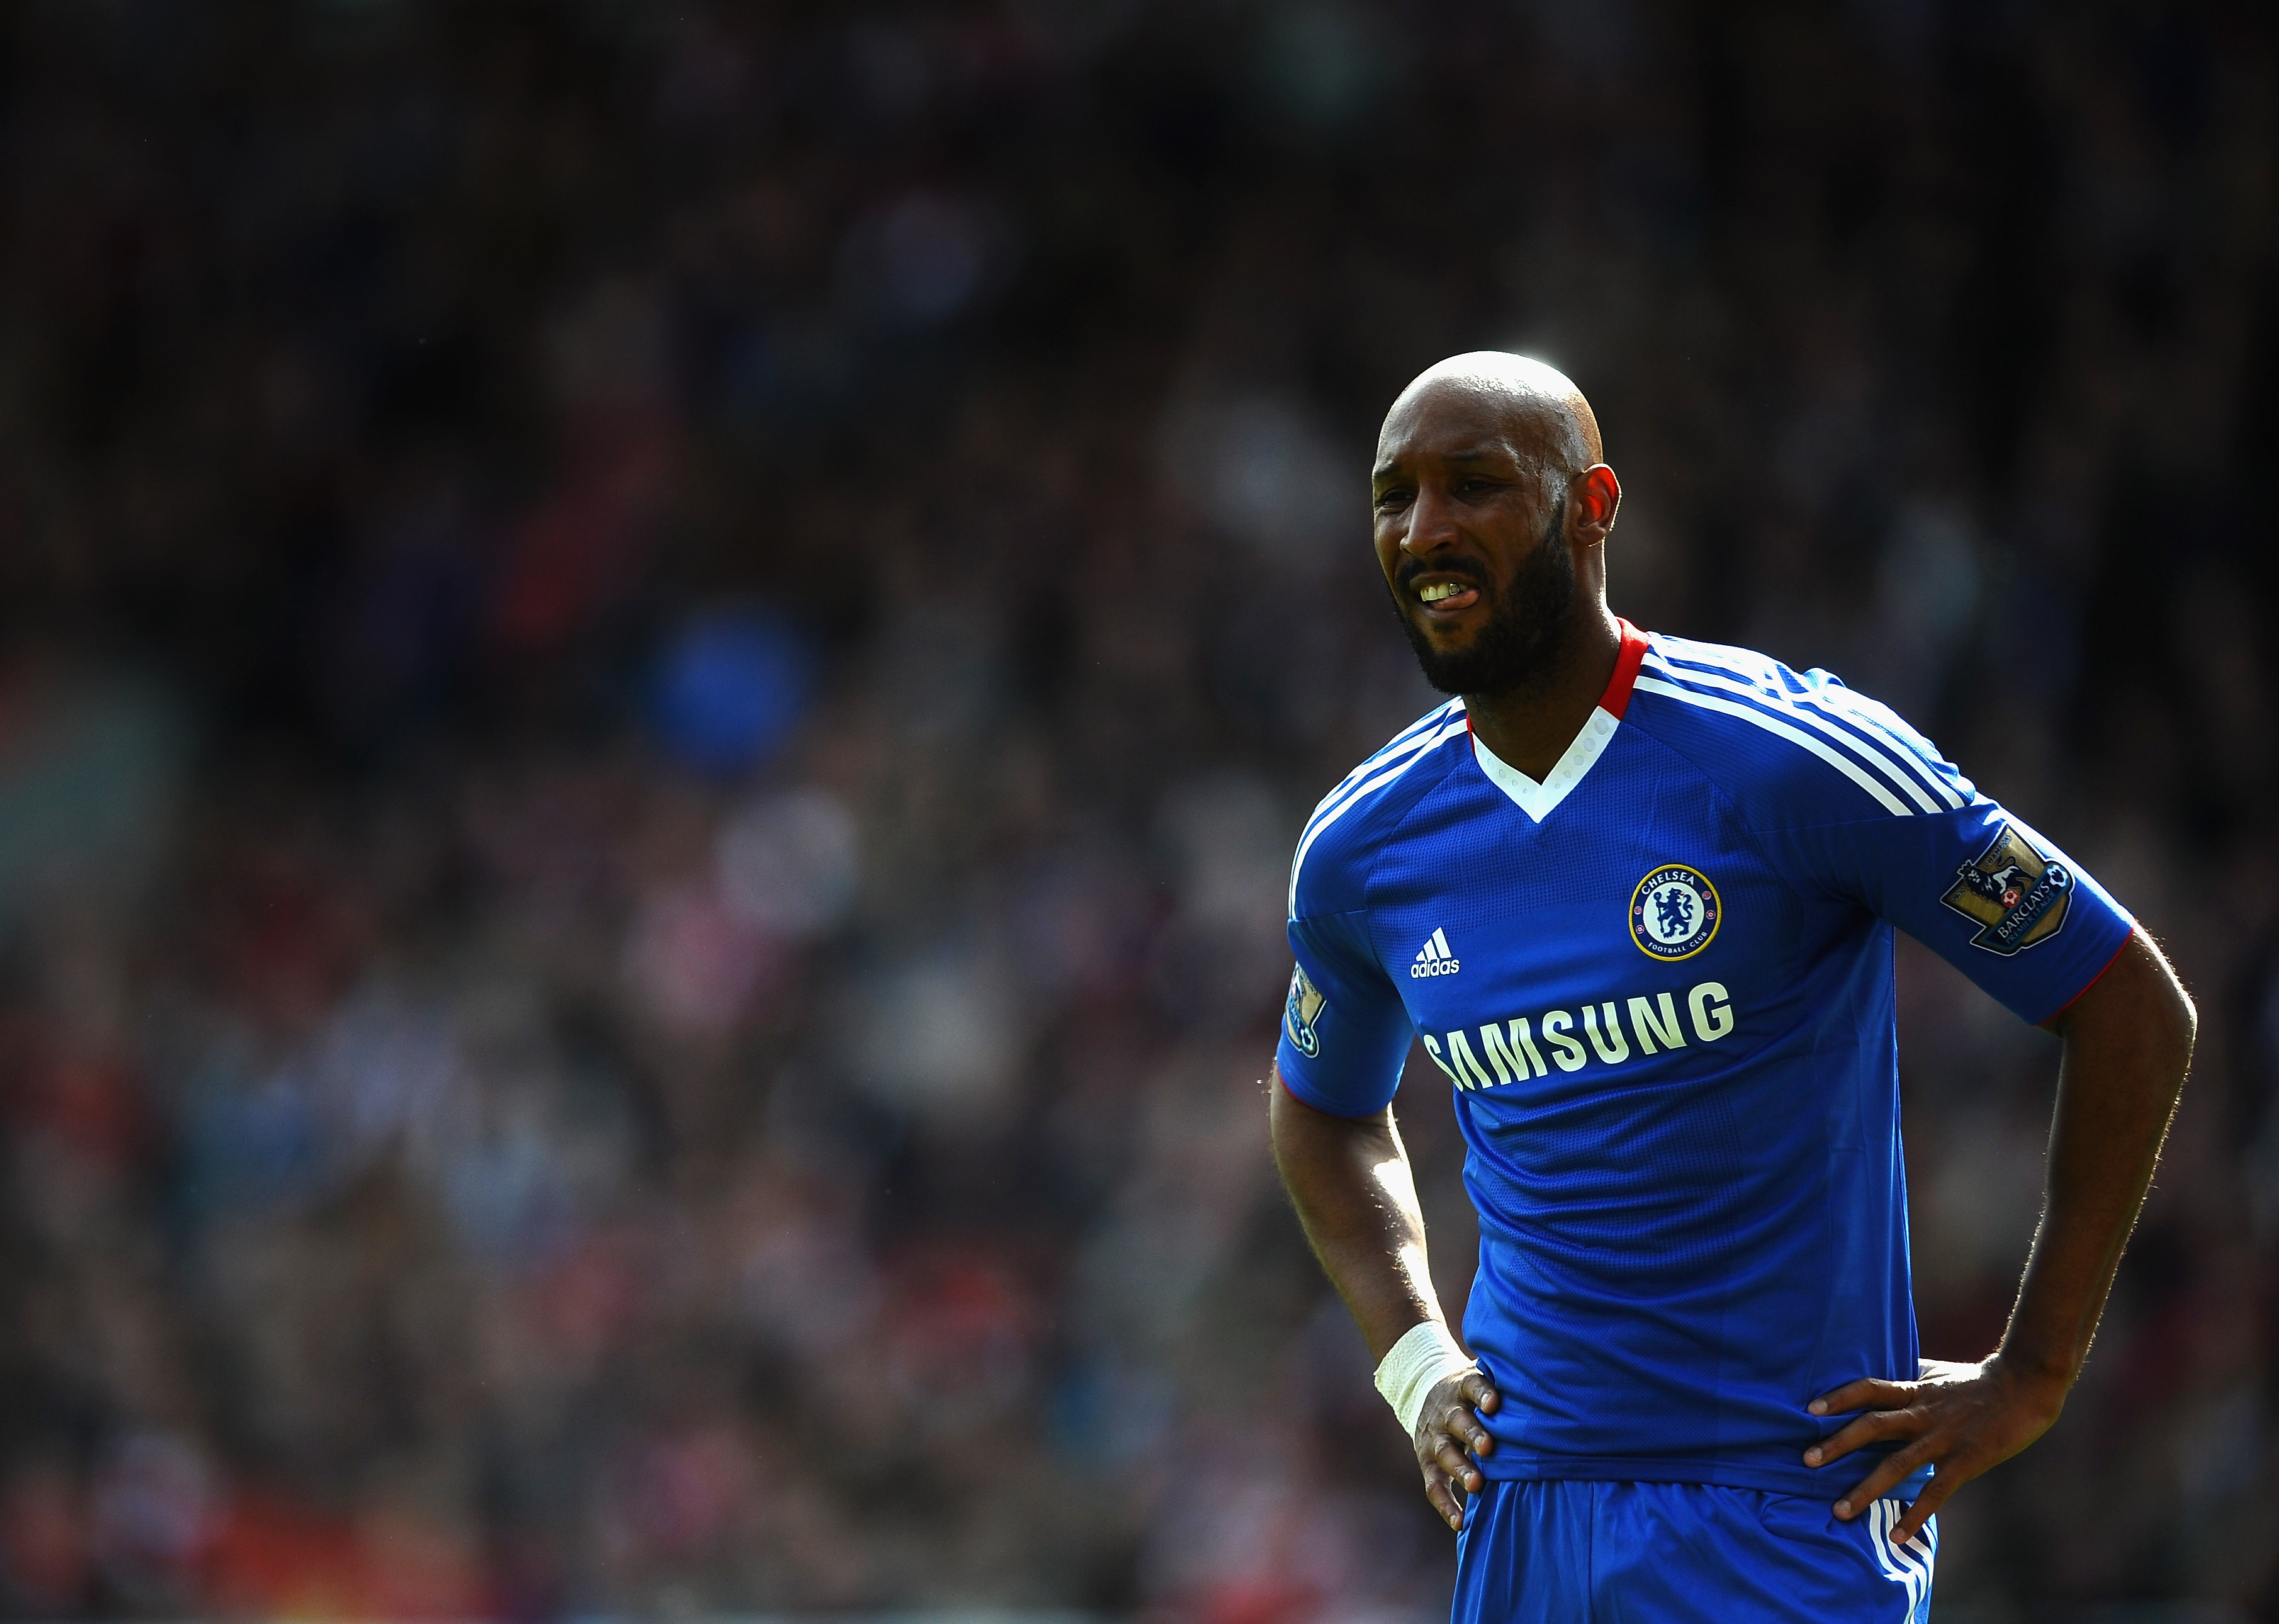 STOKE ON TRENT, ENGLAND - APRIL 02: Nicolas Anelka of Chelsea shows his frustrations during the Barclays Premier League match between Stoke City and Chelsea at Britannia Stadium on April 2, 2011 in Stoke on Trent, England.  (Photo by Laurence Griffiths/Ge